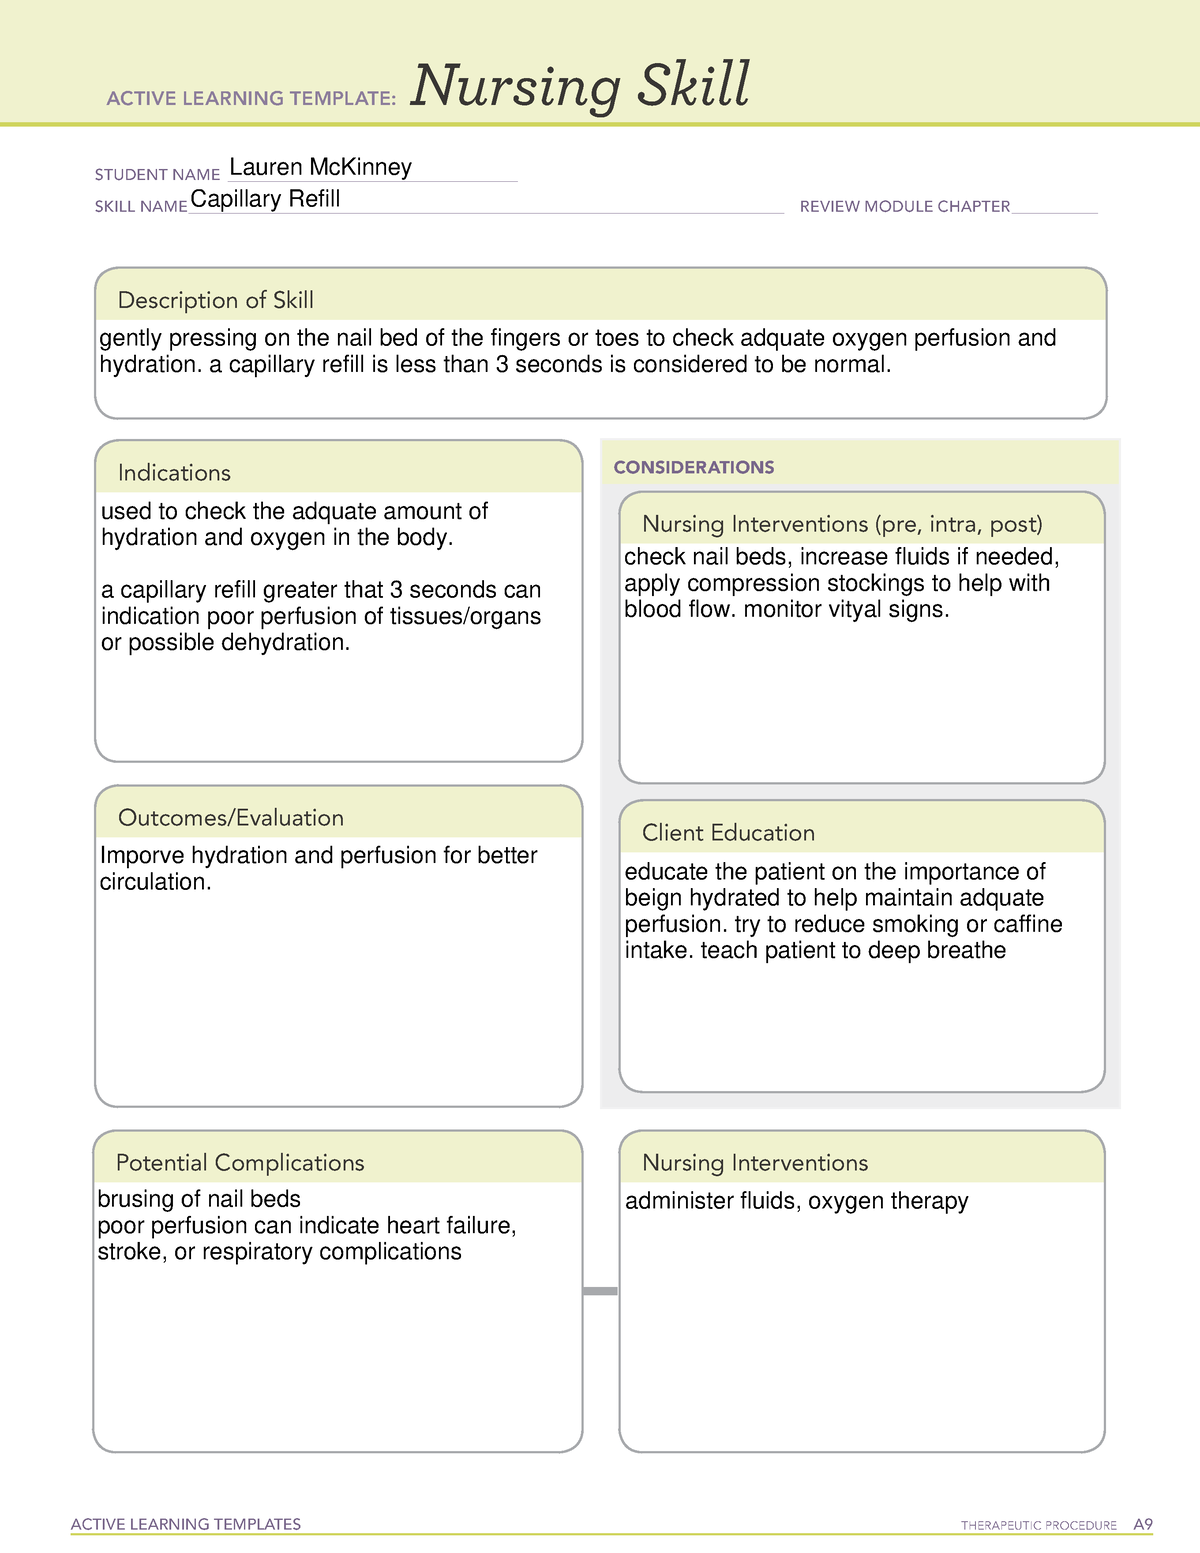 capillary-refill-active-learning-template-nursing-skill-form-active-learning-templates